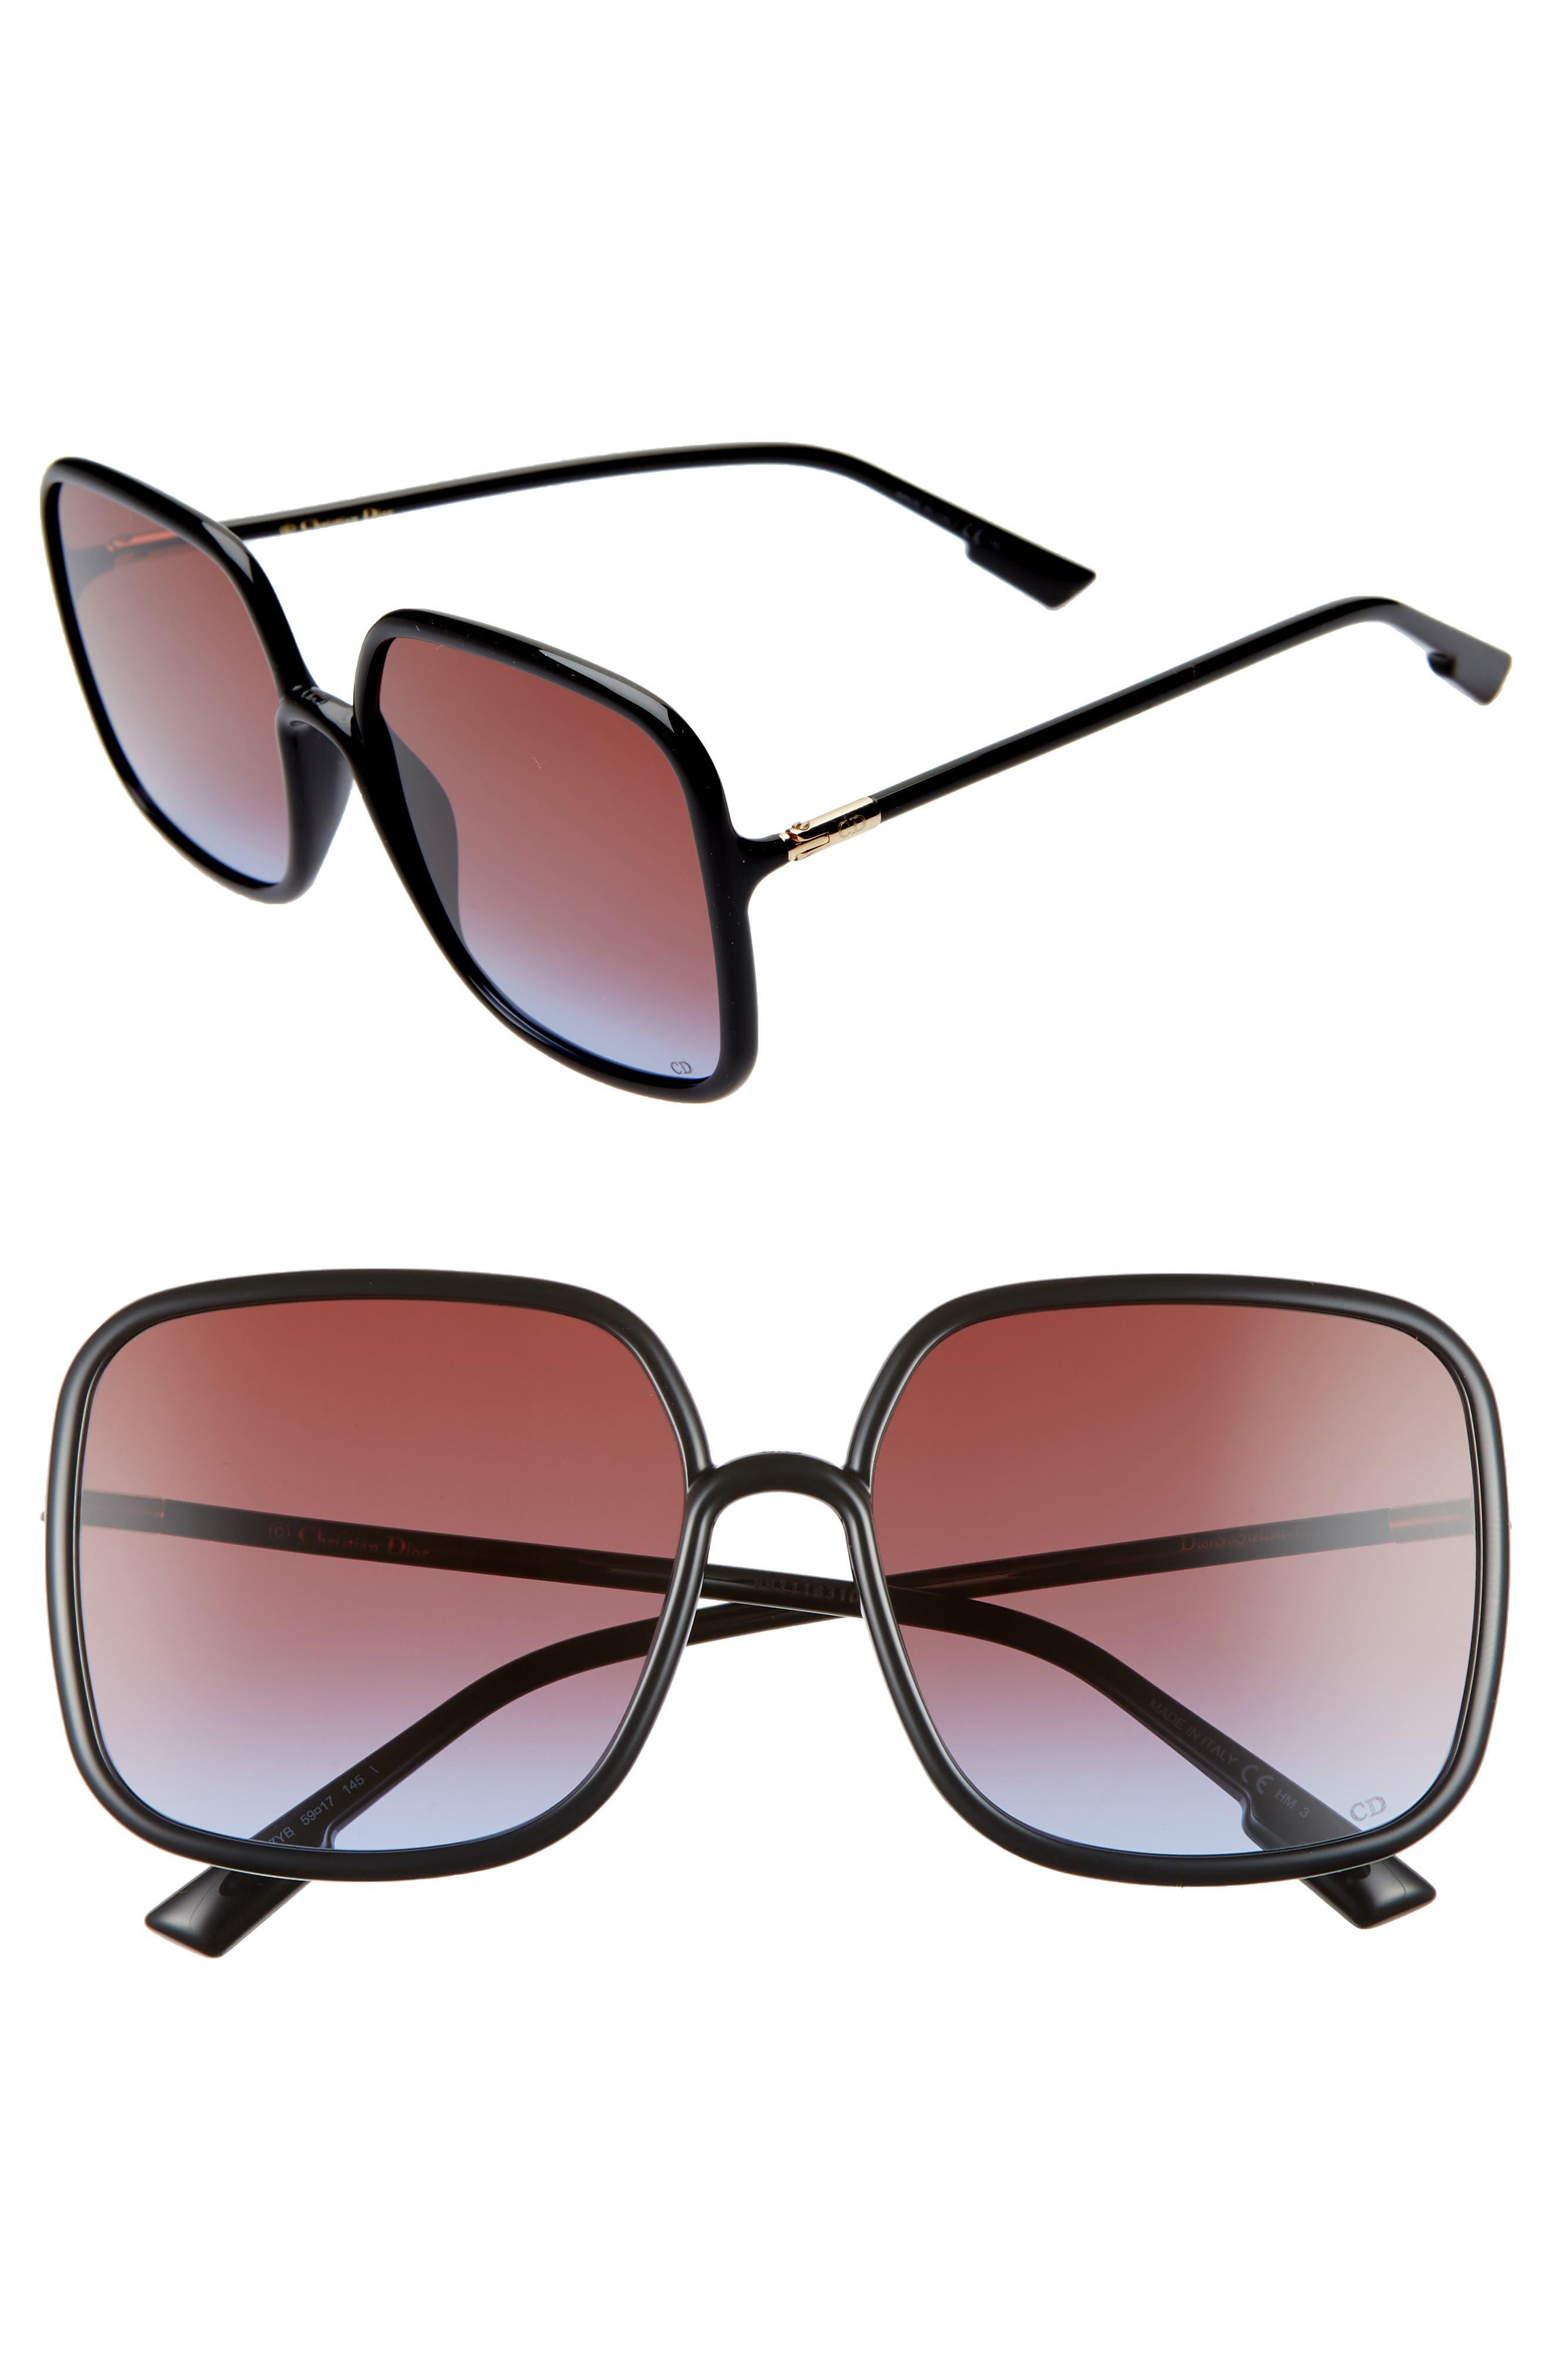 Dior Synthetic Stellair 59mm Square Sunglasses in Black - Lyst